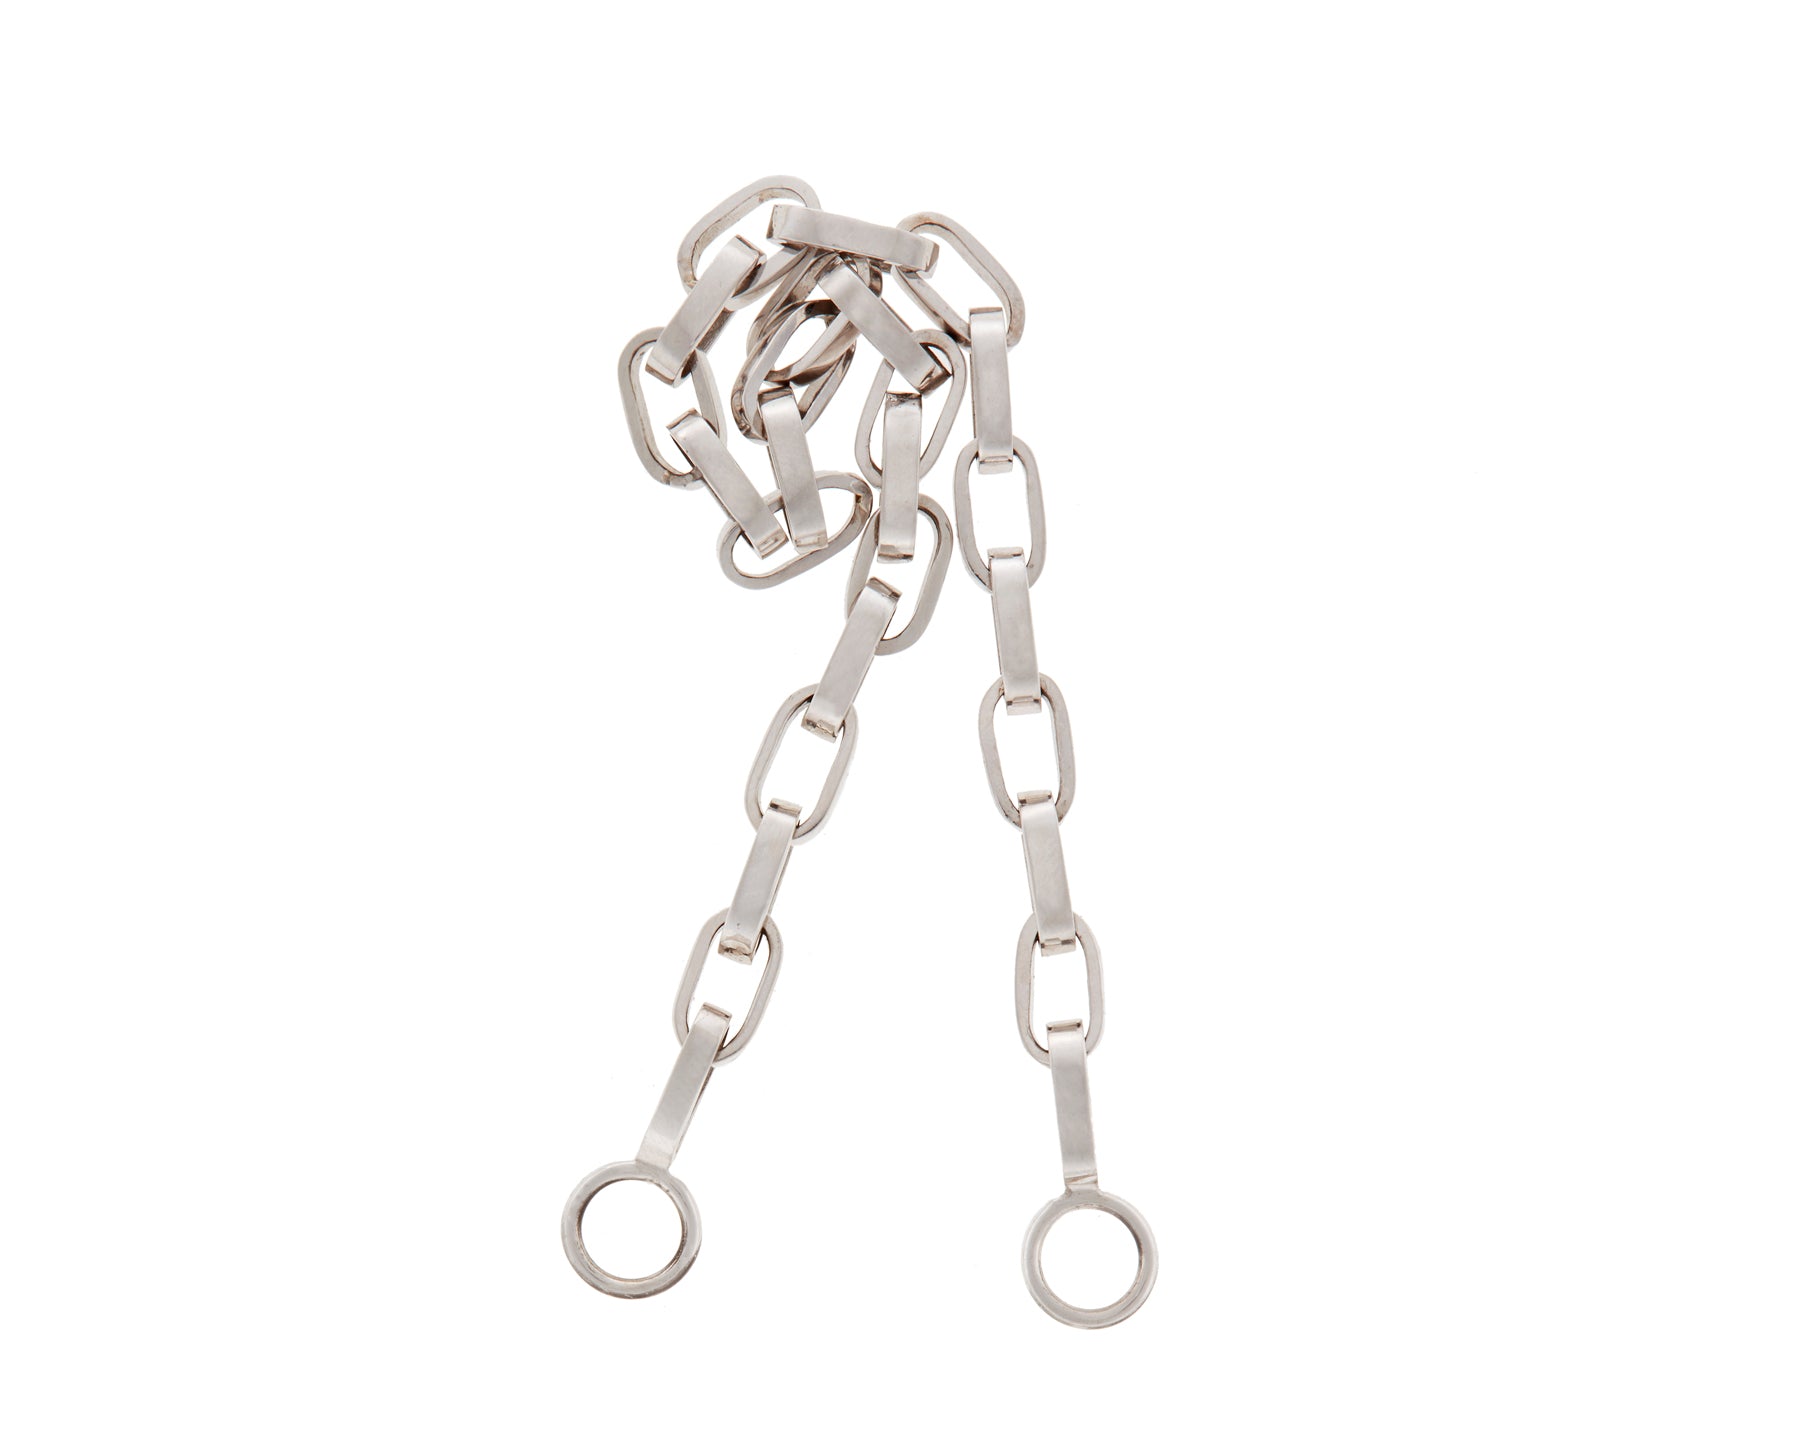 Curled up silver Marla Aaron biker chain against white backdrop